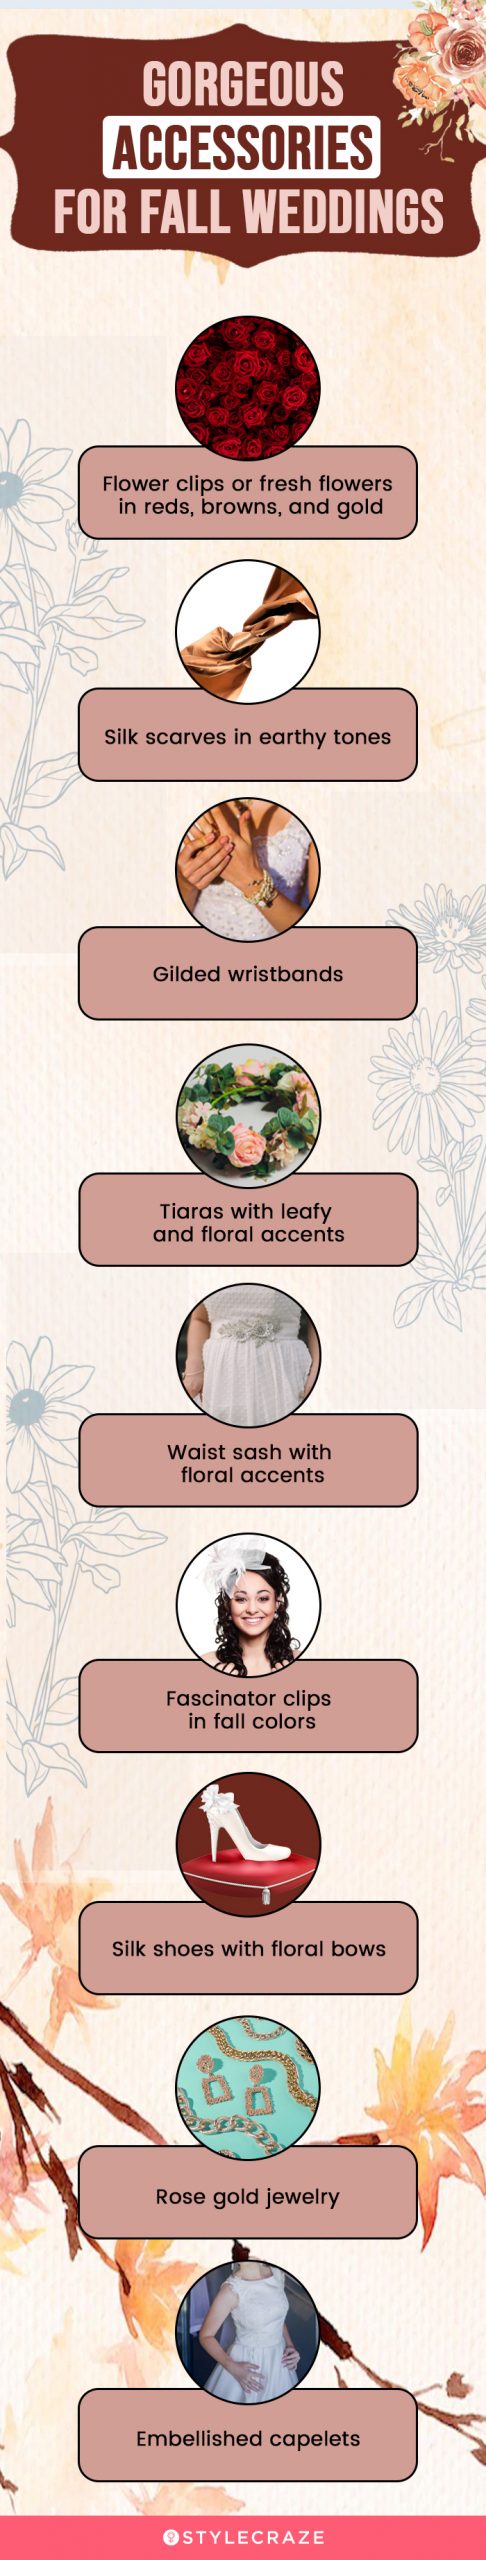 gorgeous accessories for fall weddings [infographic]